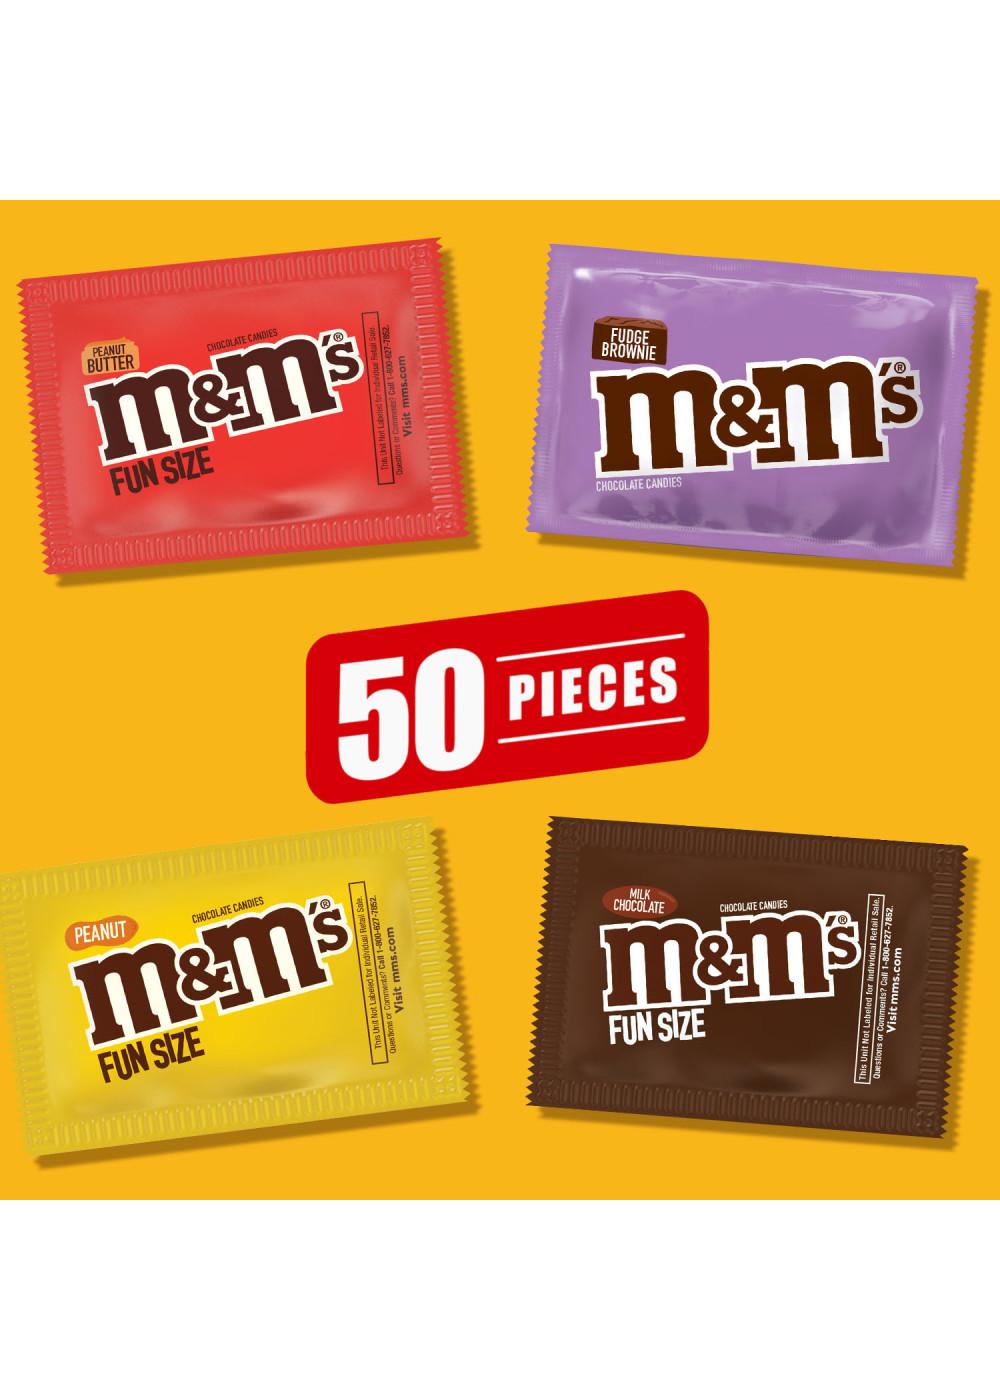 M&M'S Lovers Mix Chocolate Fun Size Candy Packs - Shop Candy at H-E-B